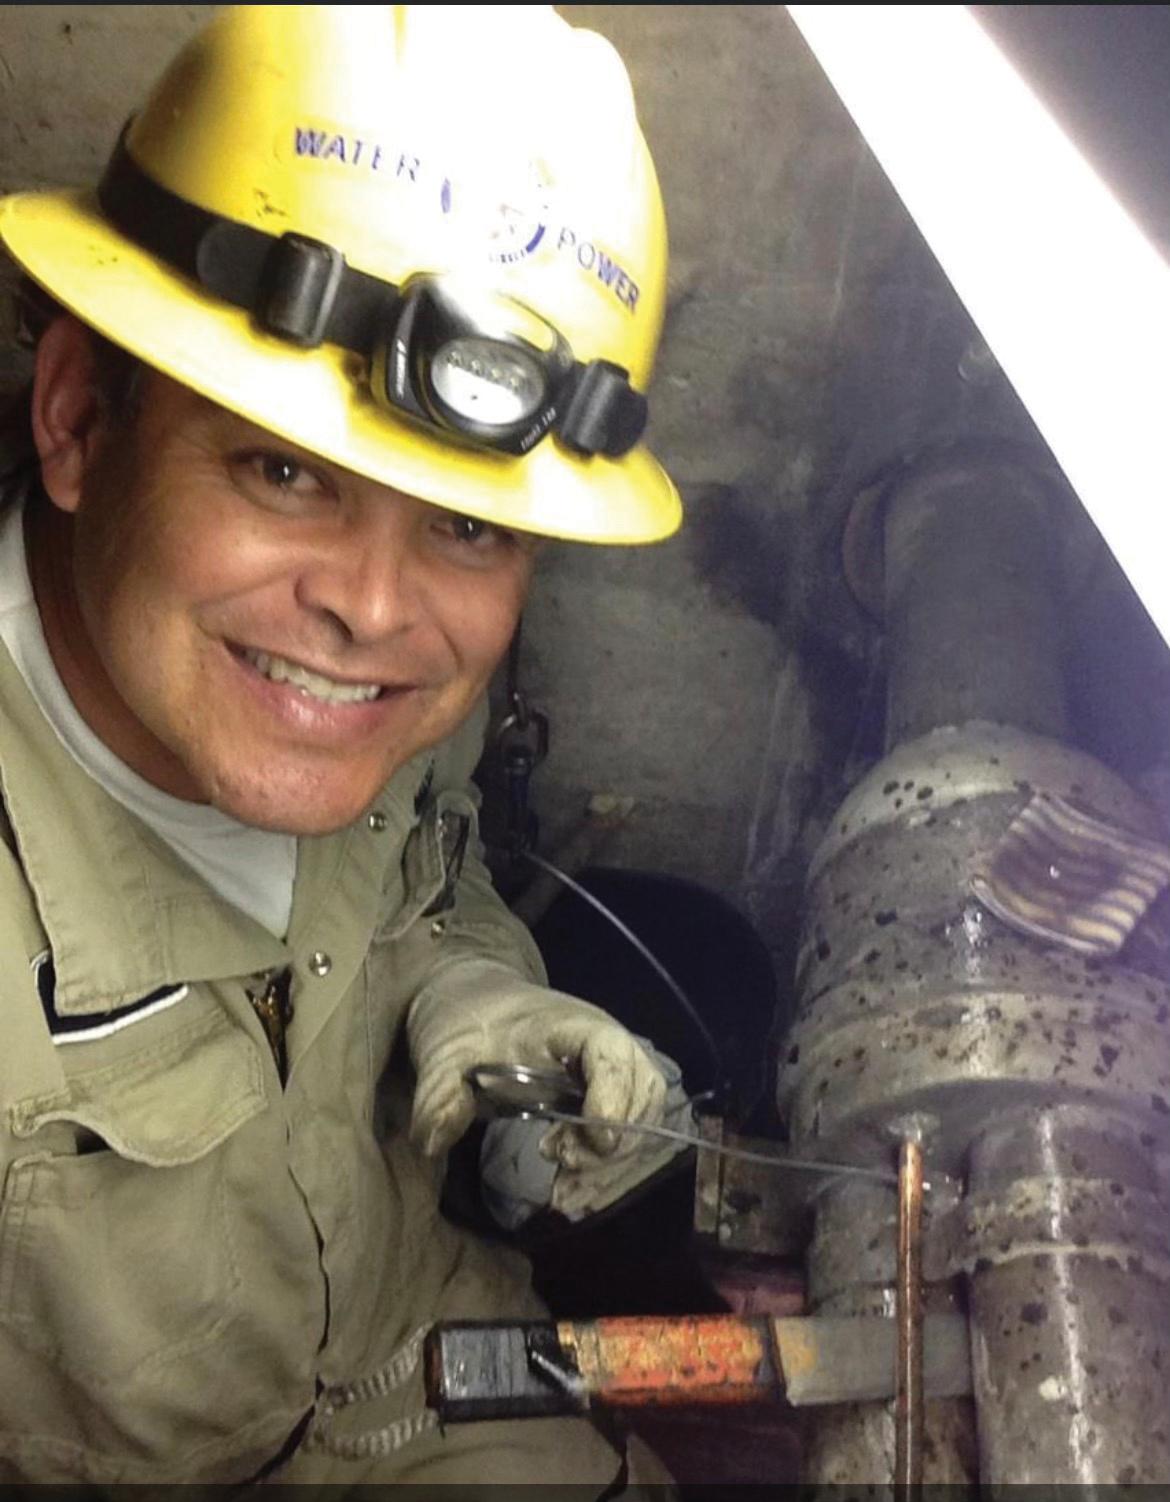 A man in a hard hat, Tony Pinon, smiles next to a series of pipes. Image by Tony Pinon.